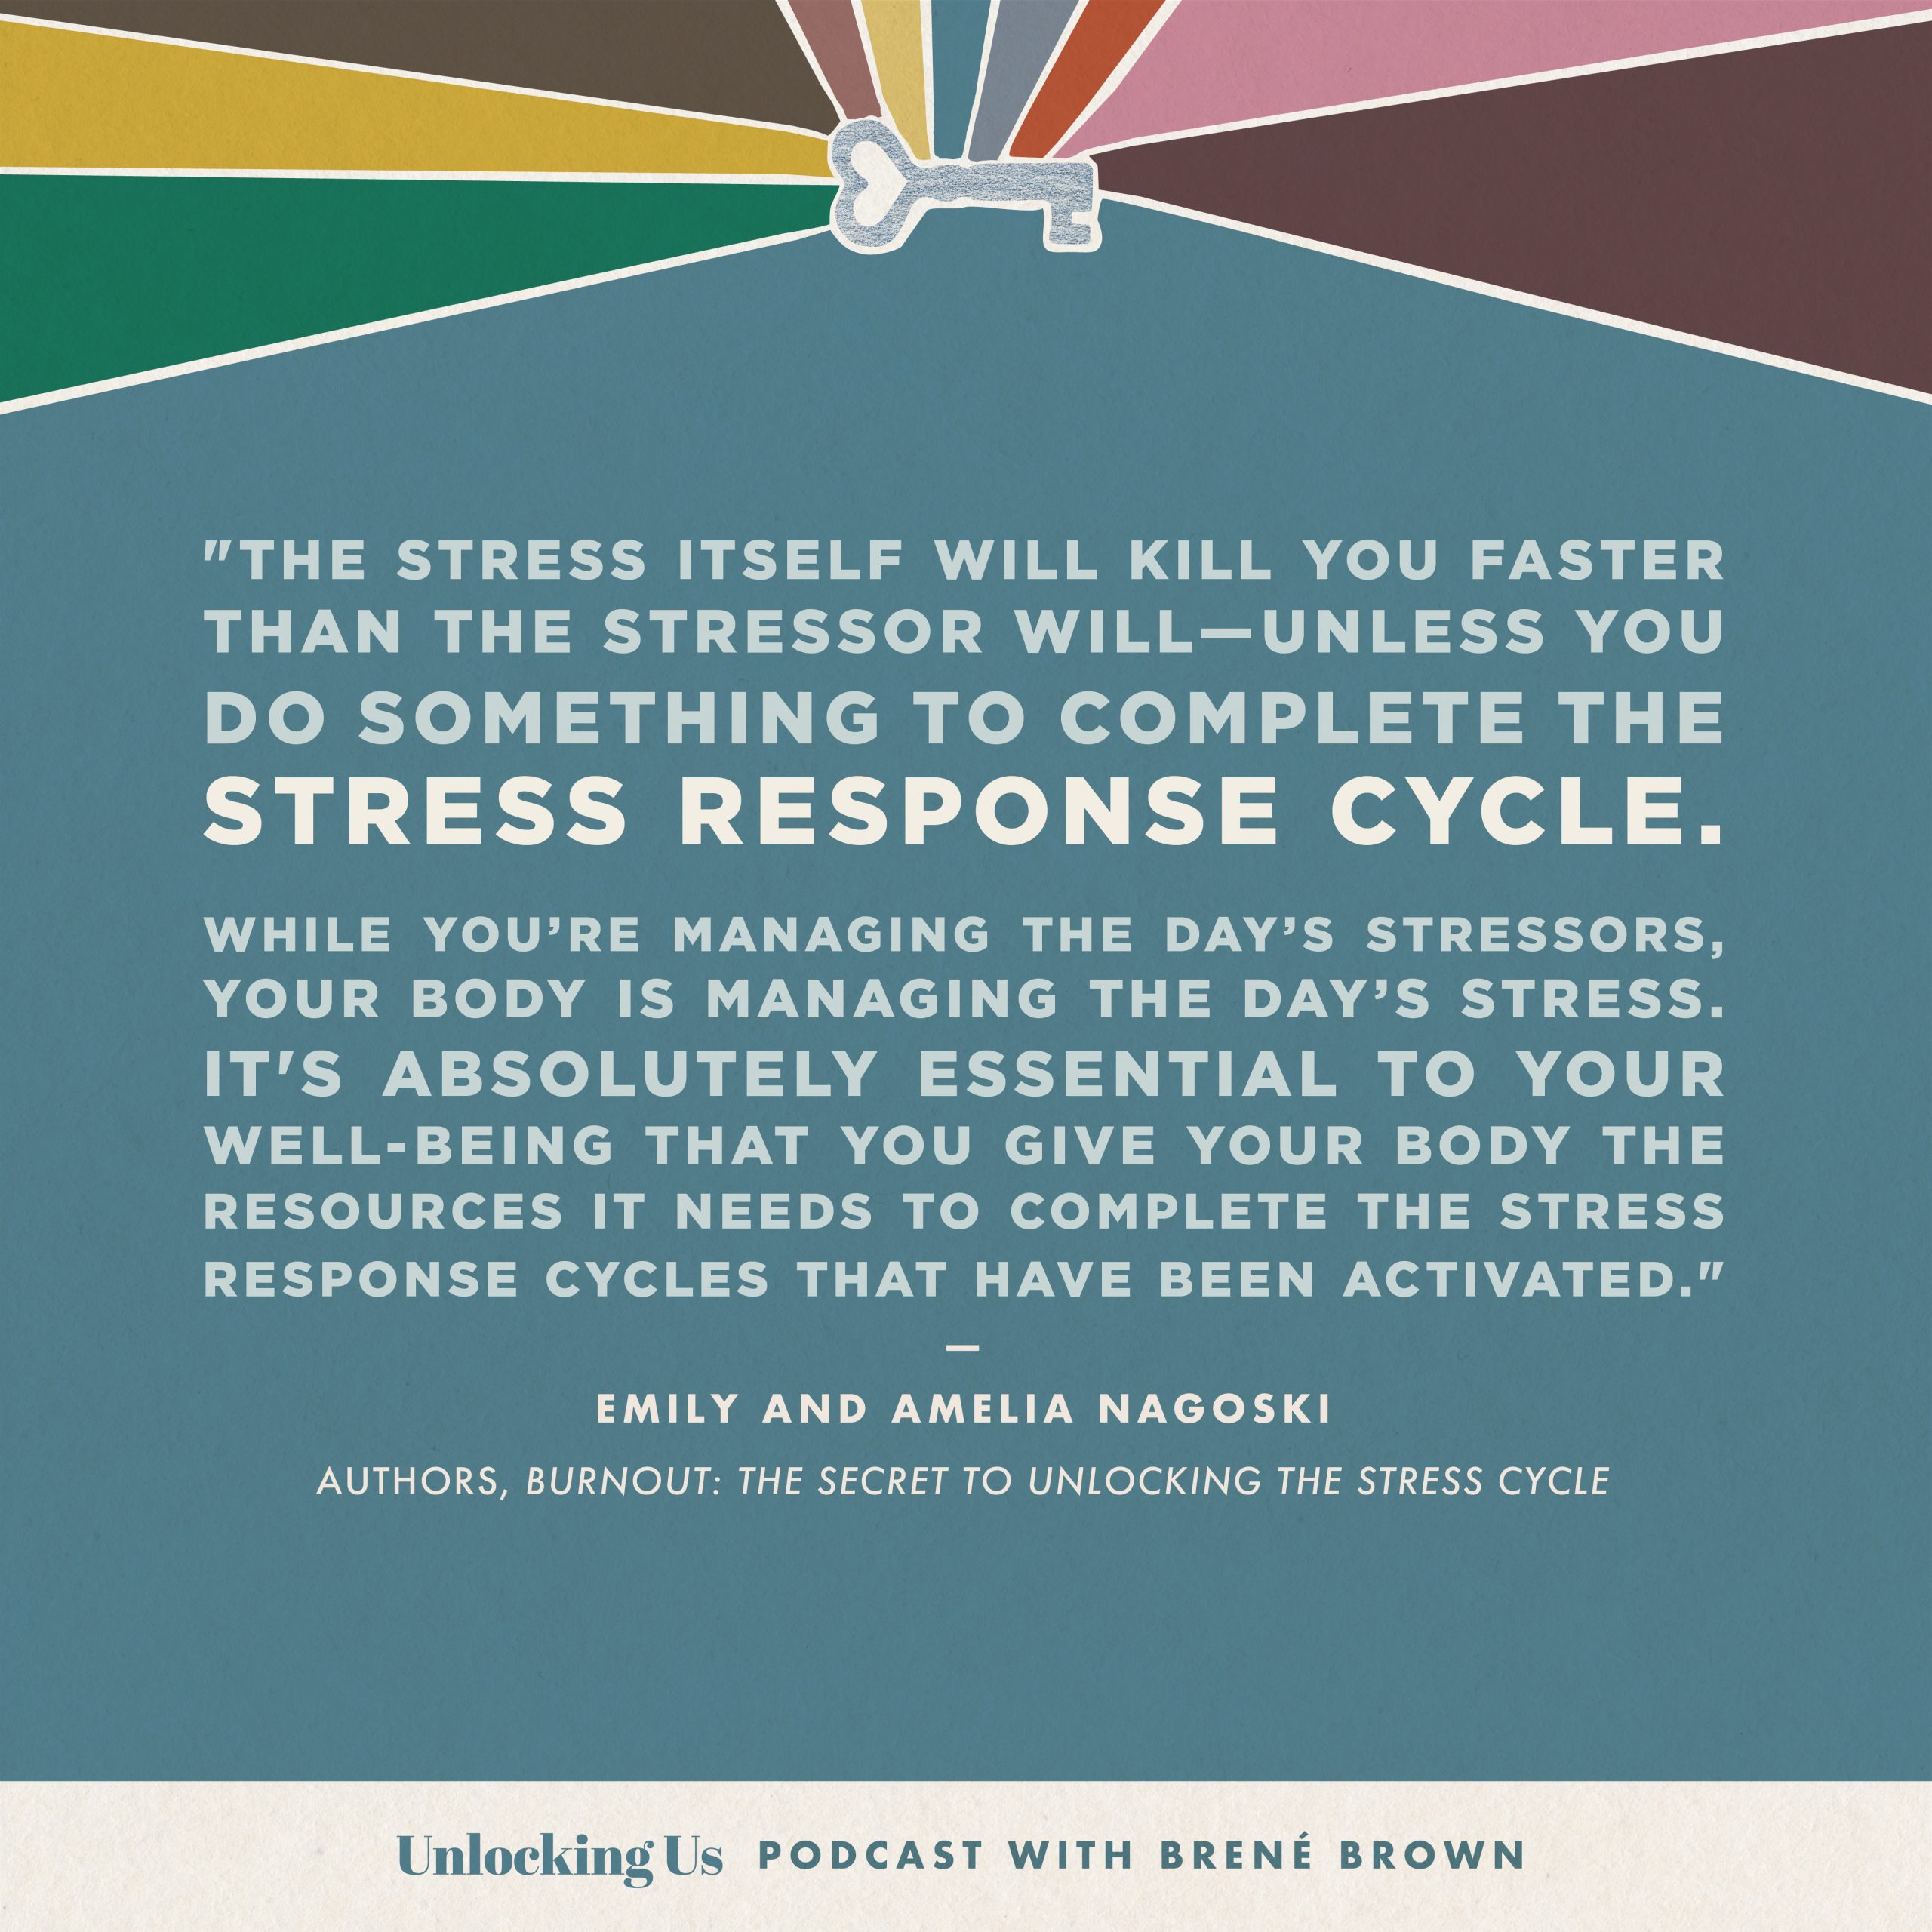 Burnout and How to Complete the Stress Cycle - Brené Brown